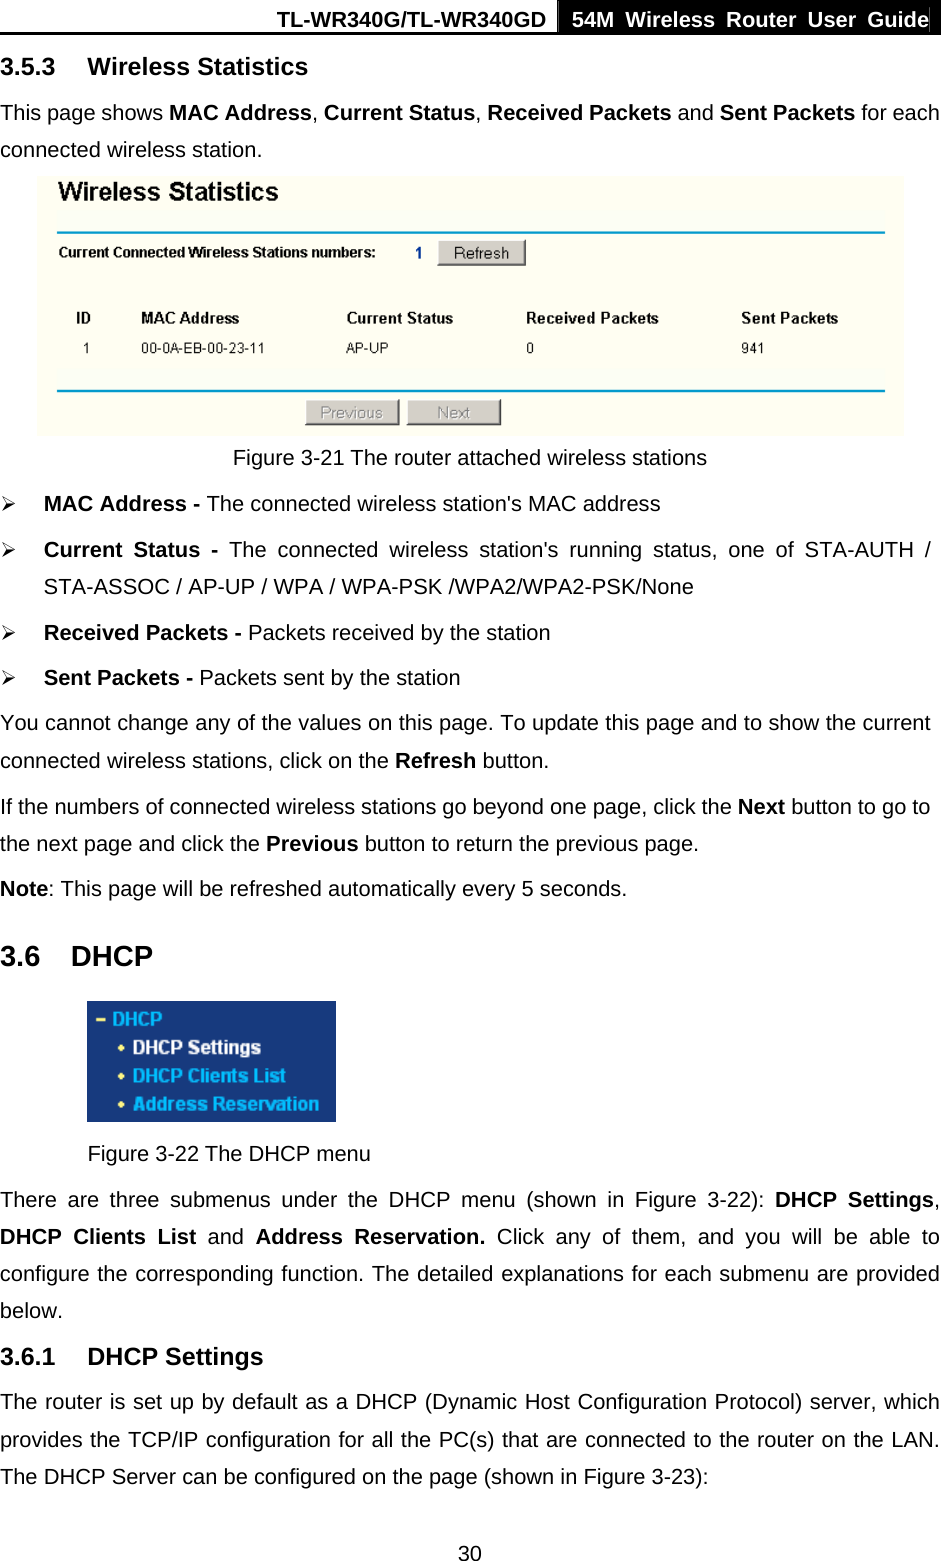 TL-WR340G/TL-WR340GD 54M Wireless Router User Guide  303.5.3 Wireless Statistics This page shows MAC Address, Current Status, Received Packets and Sent Packets for each connected wireless station.  Figure 3-21 The router attached wireless stations ¾ MAC Address - The connected wireless station&apos;s MAC address ¾ Current Status - The connected wireless station&apos;s running status, one of STA-AUTH / STA-ASSOC / AP-UP / WPA / WPA-PSK /WPA2/WPA2-PSK/None ¾ Received Packets - Packets received by the station ¾ Sent Packets - Packets sent by the station You cannot change any of the values on this page. To update this page and to show the current connected wireless stations, click on the Refresh button.   If the numbers of connected wireless stations go beyond one page, click the Next button to go to the next page and click the Previous button to return the previous page. Note: This page will be refreshed automatically every 5 seconds. 3.6 DHCP  Figure 3-22 The DHCP menu There are three submenus under the DHCP menu (shown in Figure 3-22): DHCP Settings, DHCP Clients List and  Address Reservation. Click any of them, and you will be able to configure the corresponding function. The detailed explanations for each submenu are provided below. 3.6.1 DHCP Settings The router is set up by default as a DHCP (Dynamic Host Configuration Protocol) server, which provides the TCP/IP configuration for all the PC(s) that are connected to the router on the LAN. The DHCP Server can be configured on the page (shown in Figure 3-23): 